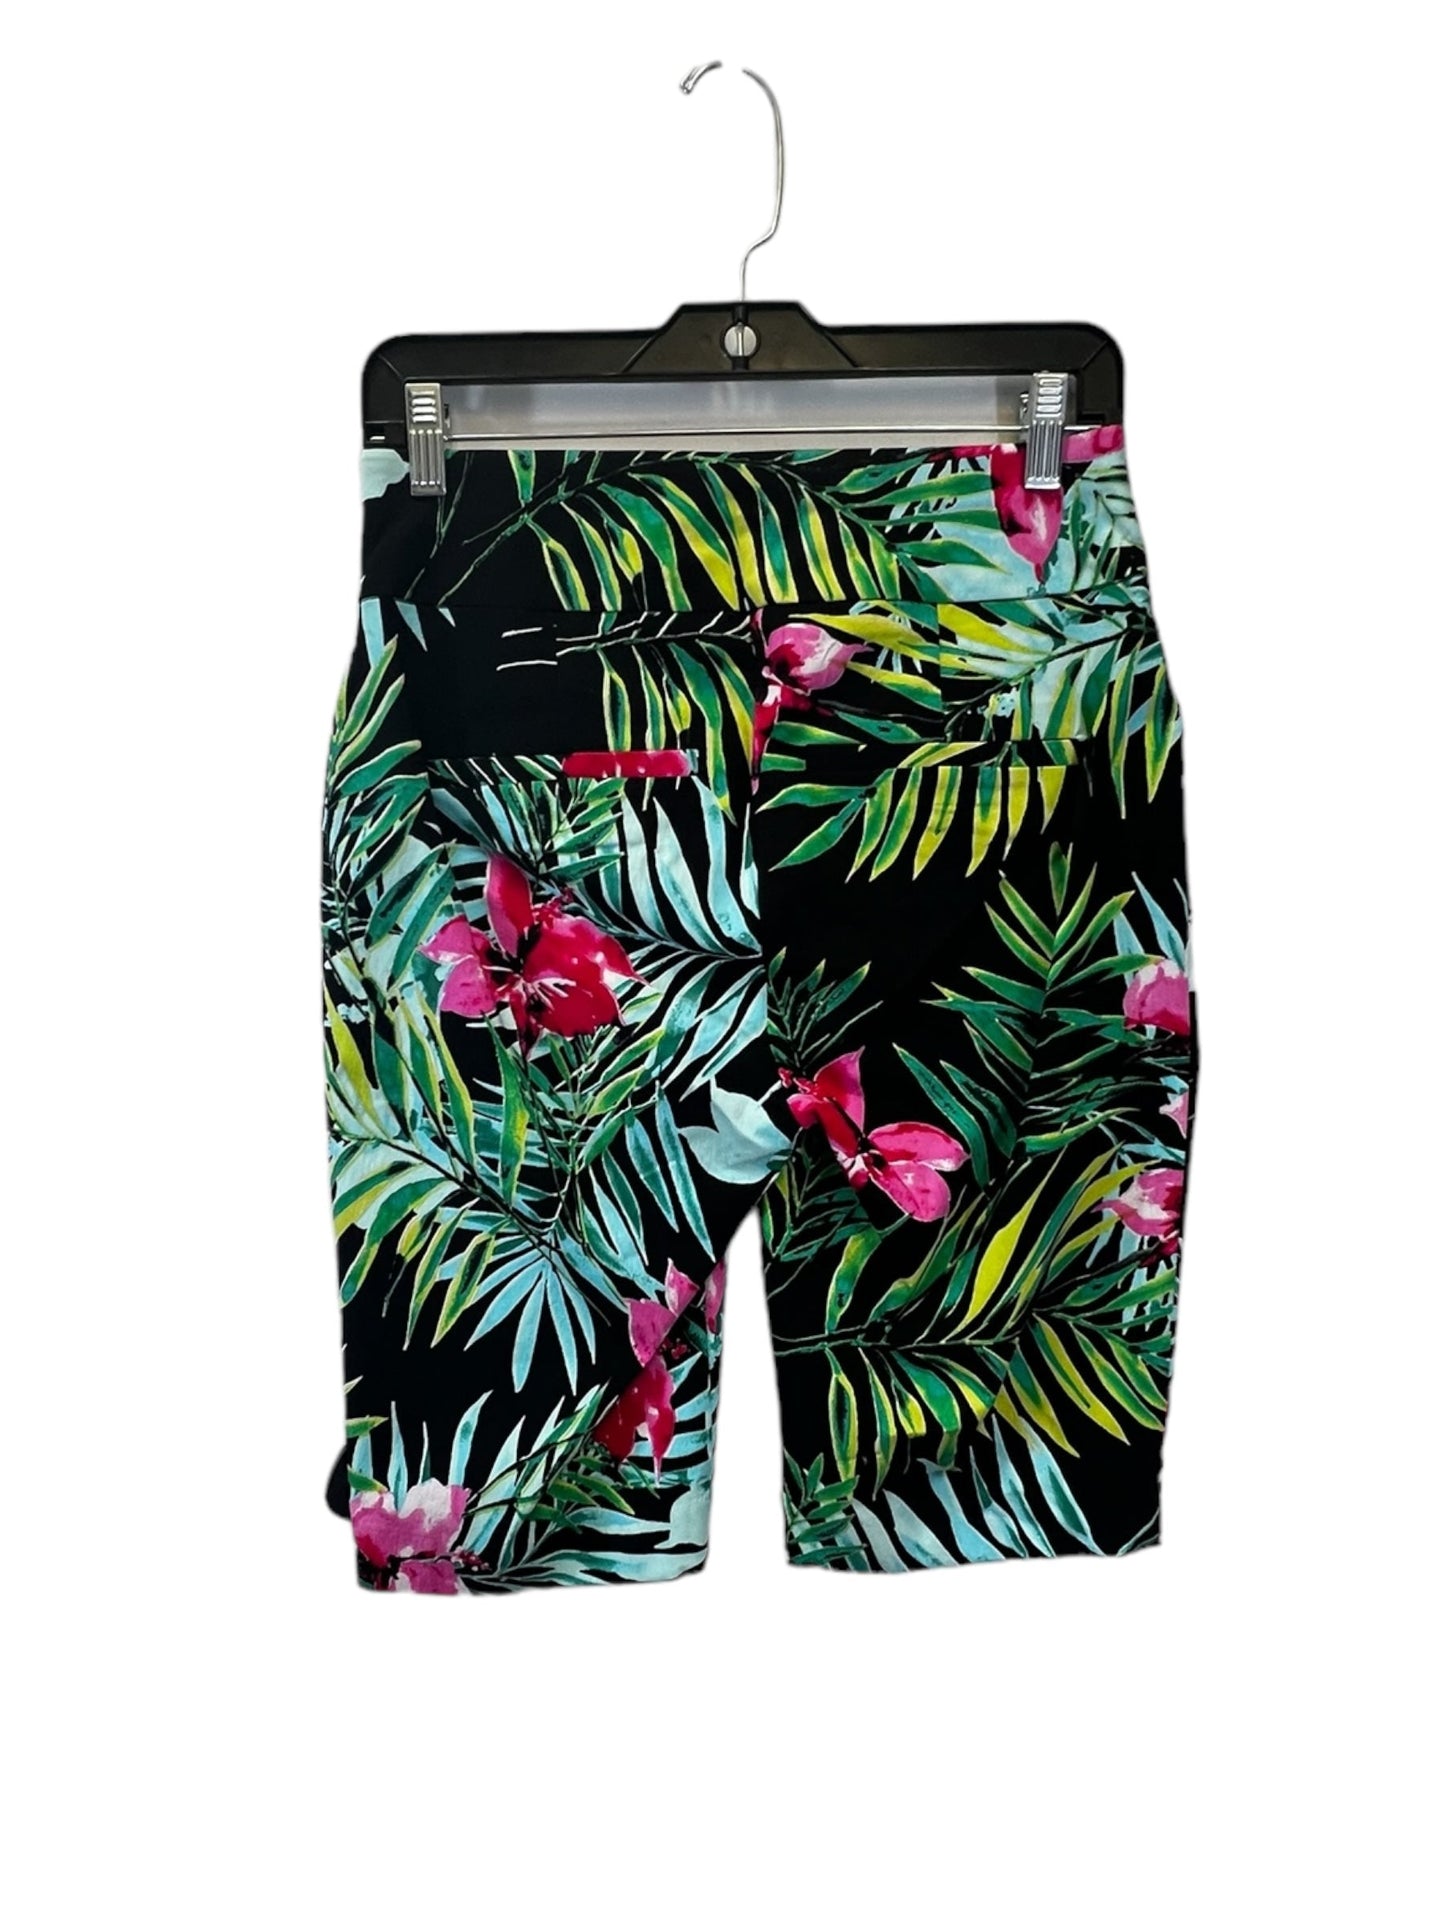 Tropical Print Shorts New York And Co, Size M